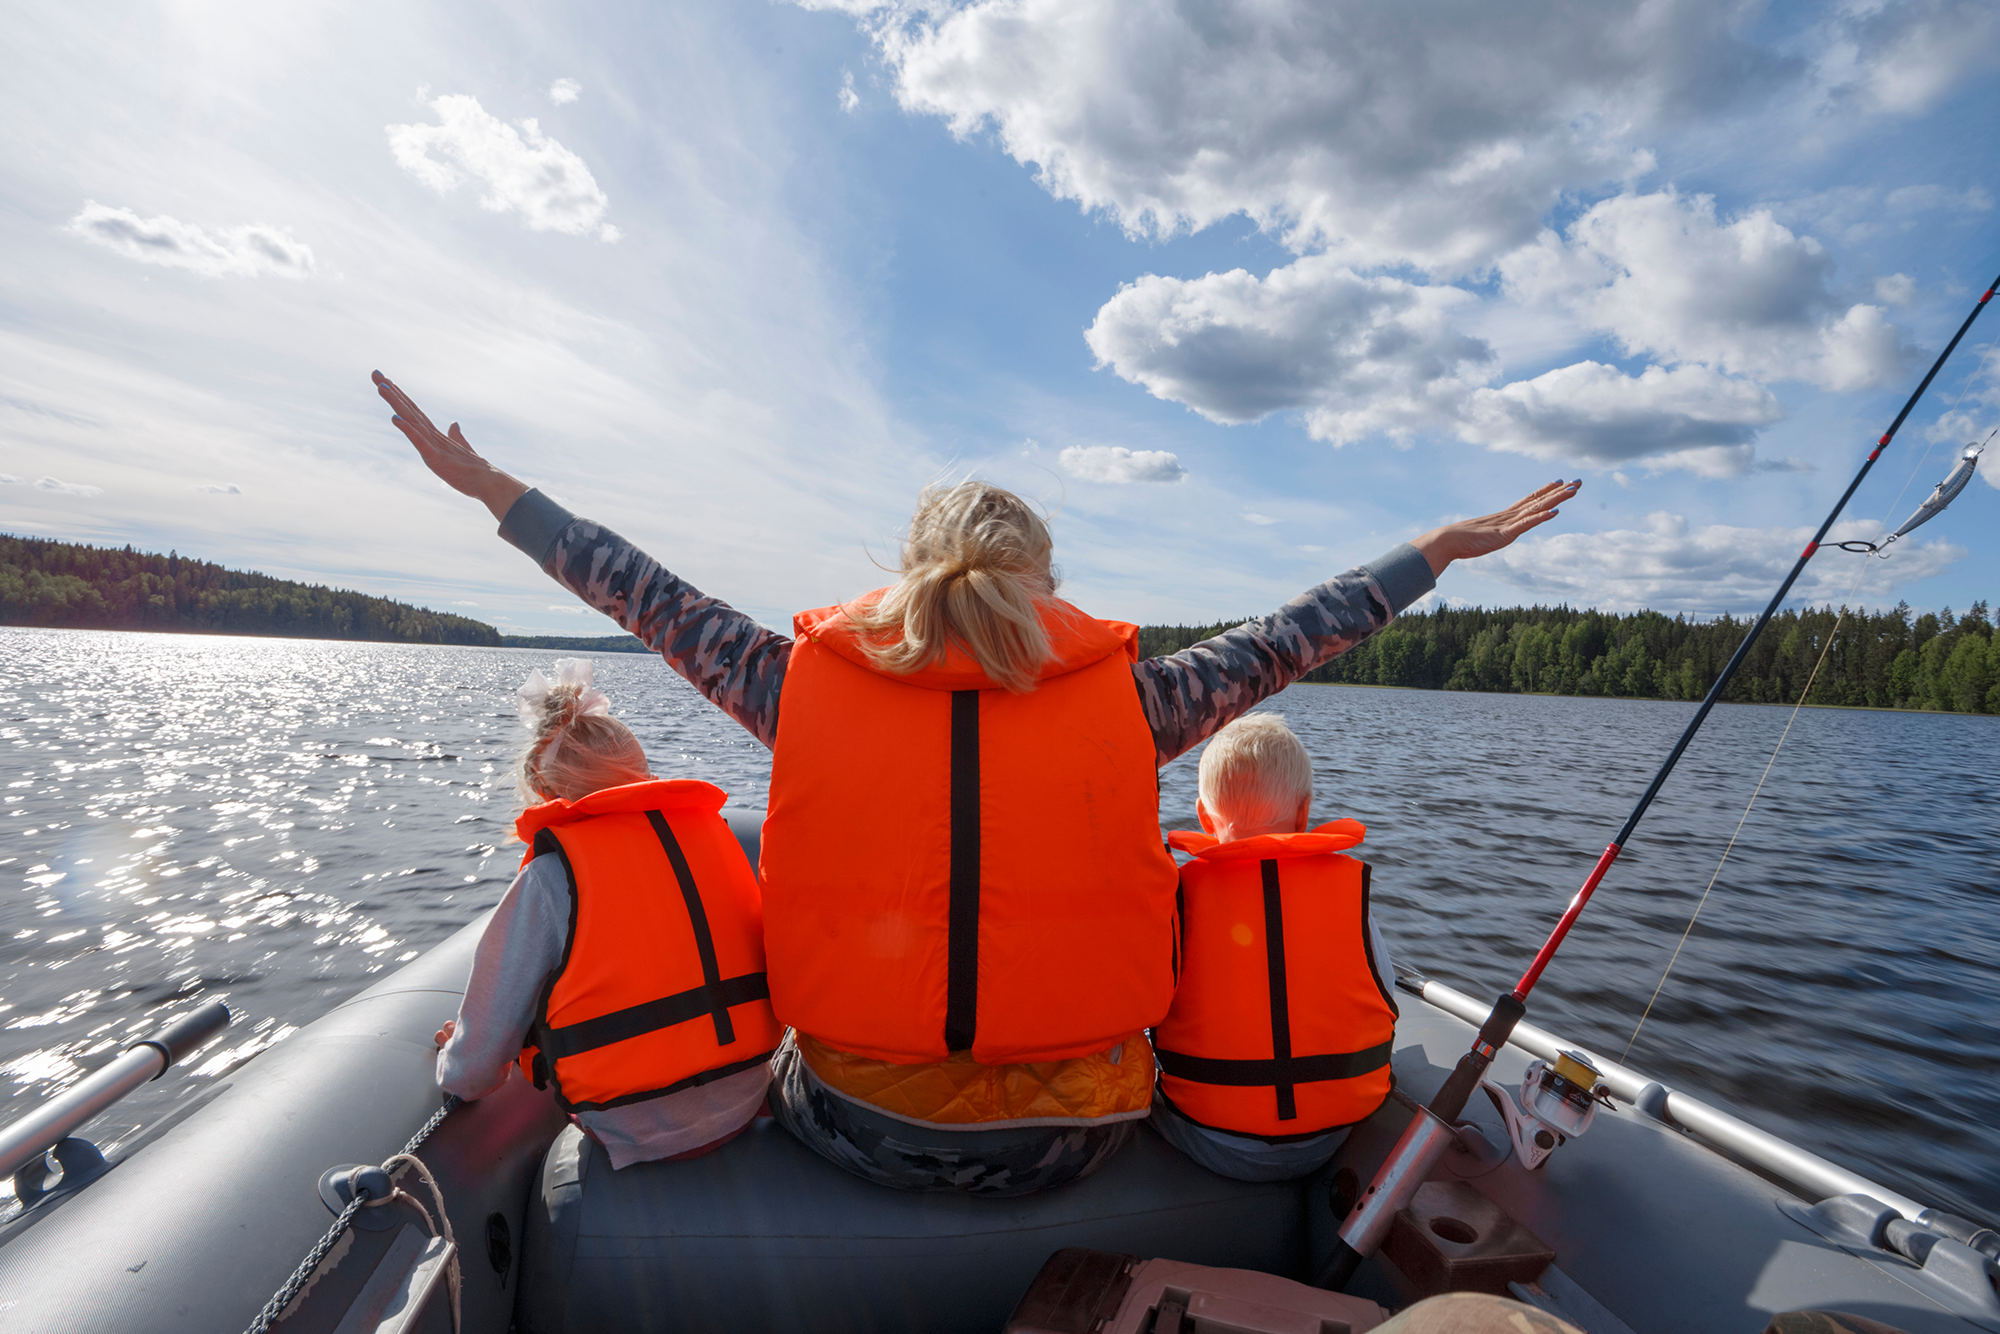 Boating Safety Tips: A woman with two young children on either side, all wearing life jackets on a boat.